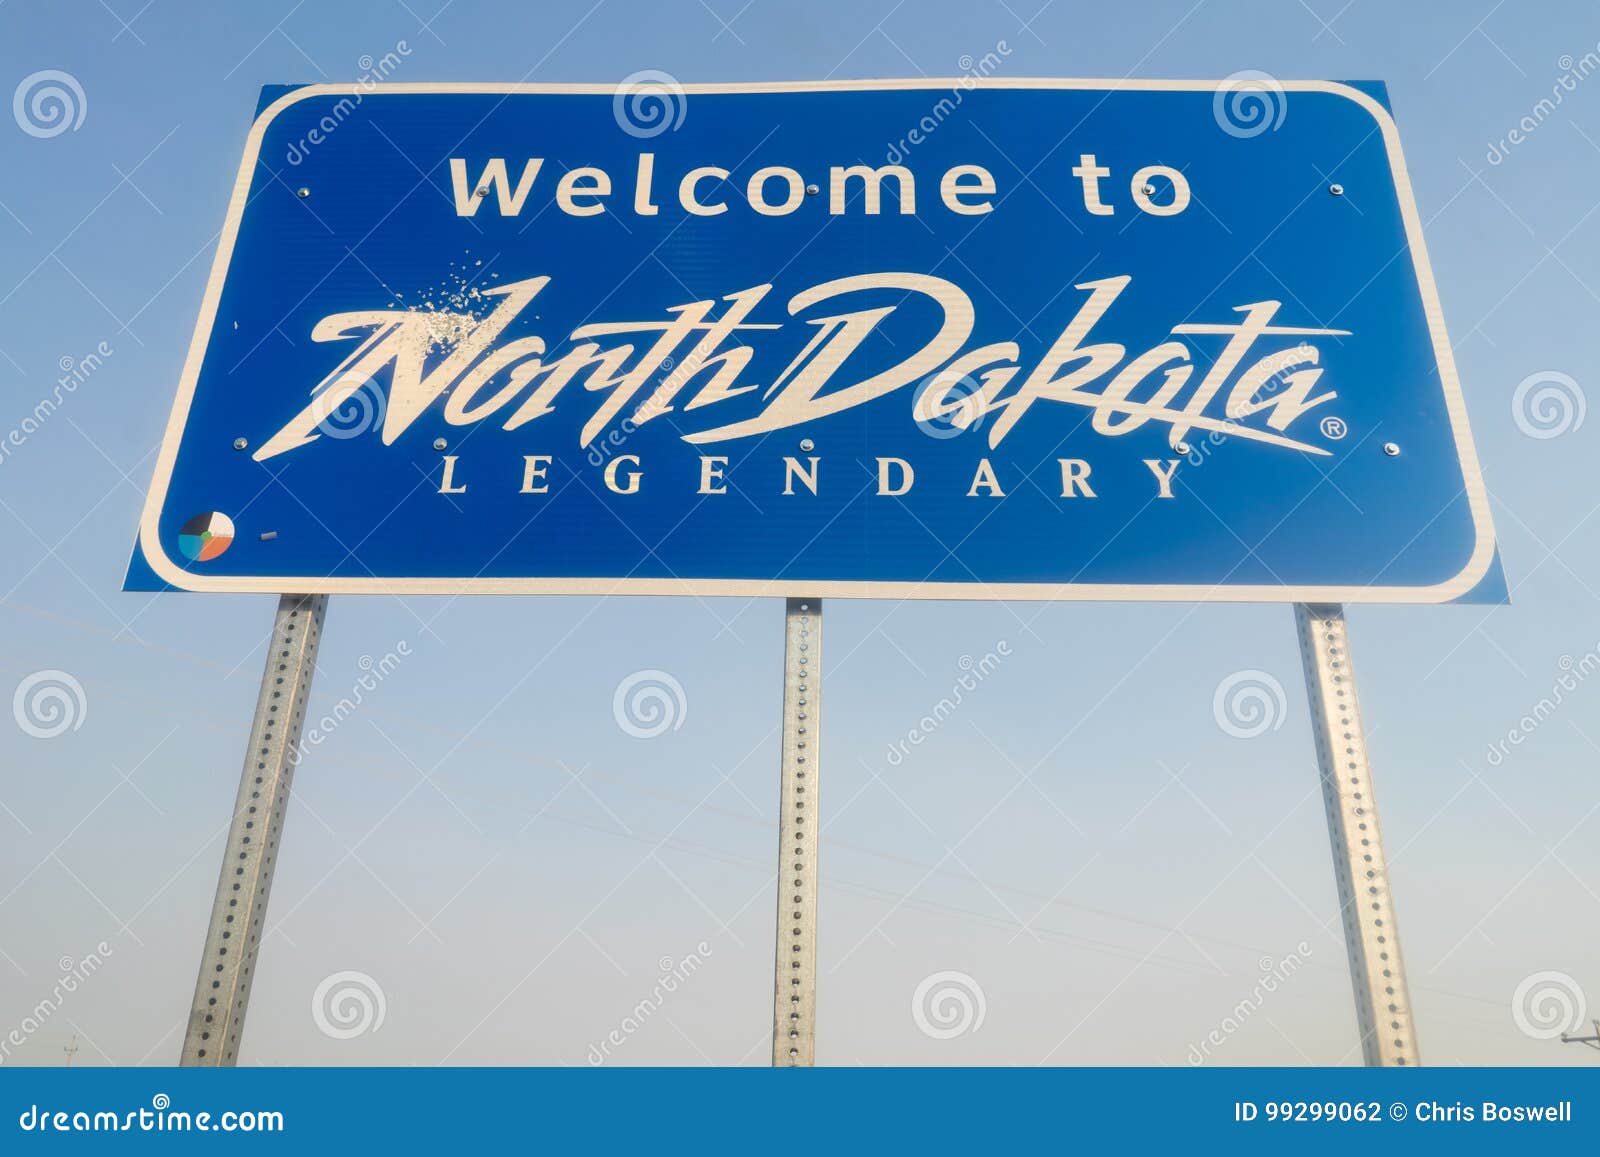 welcome to legendary north dakota road entry sign